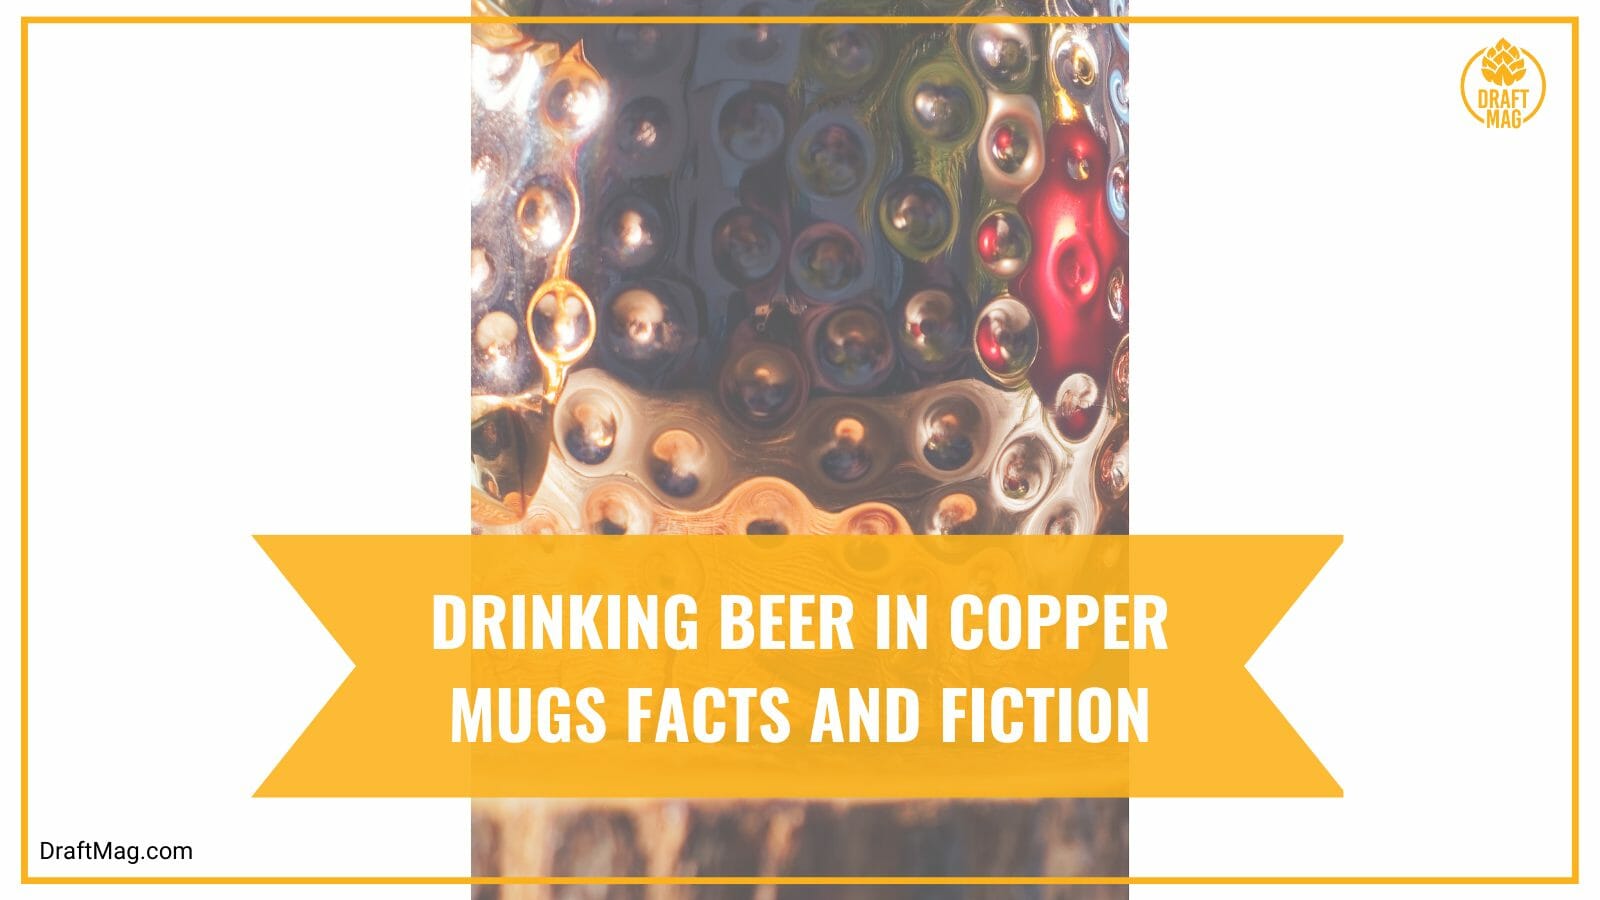 Facts and fiction of copper mugs